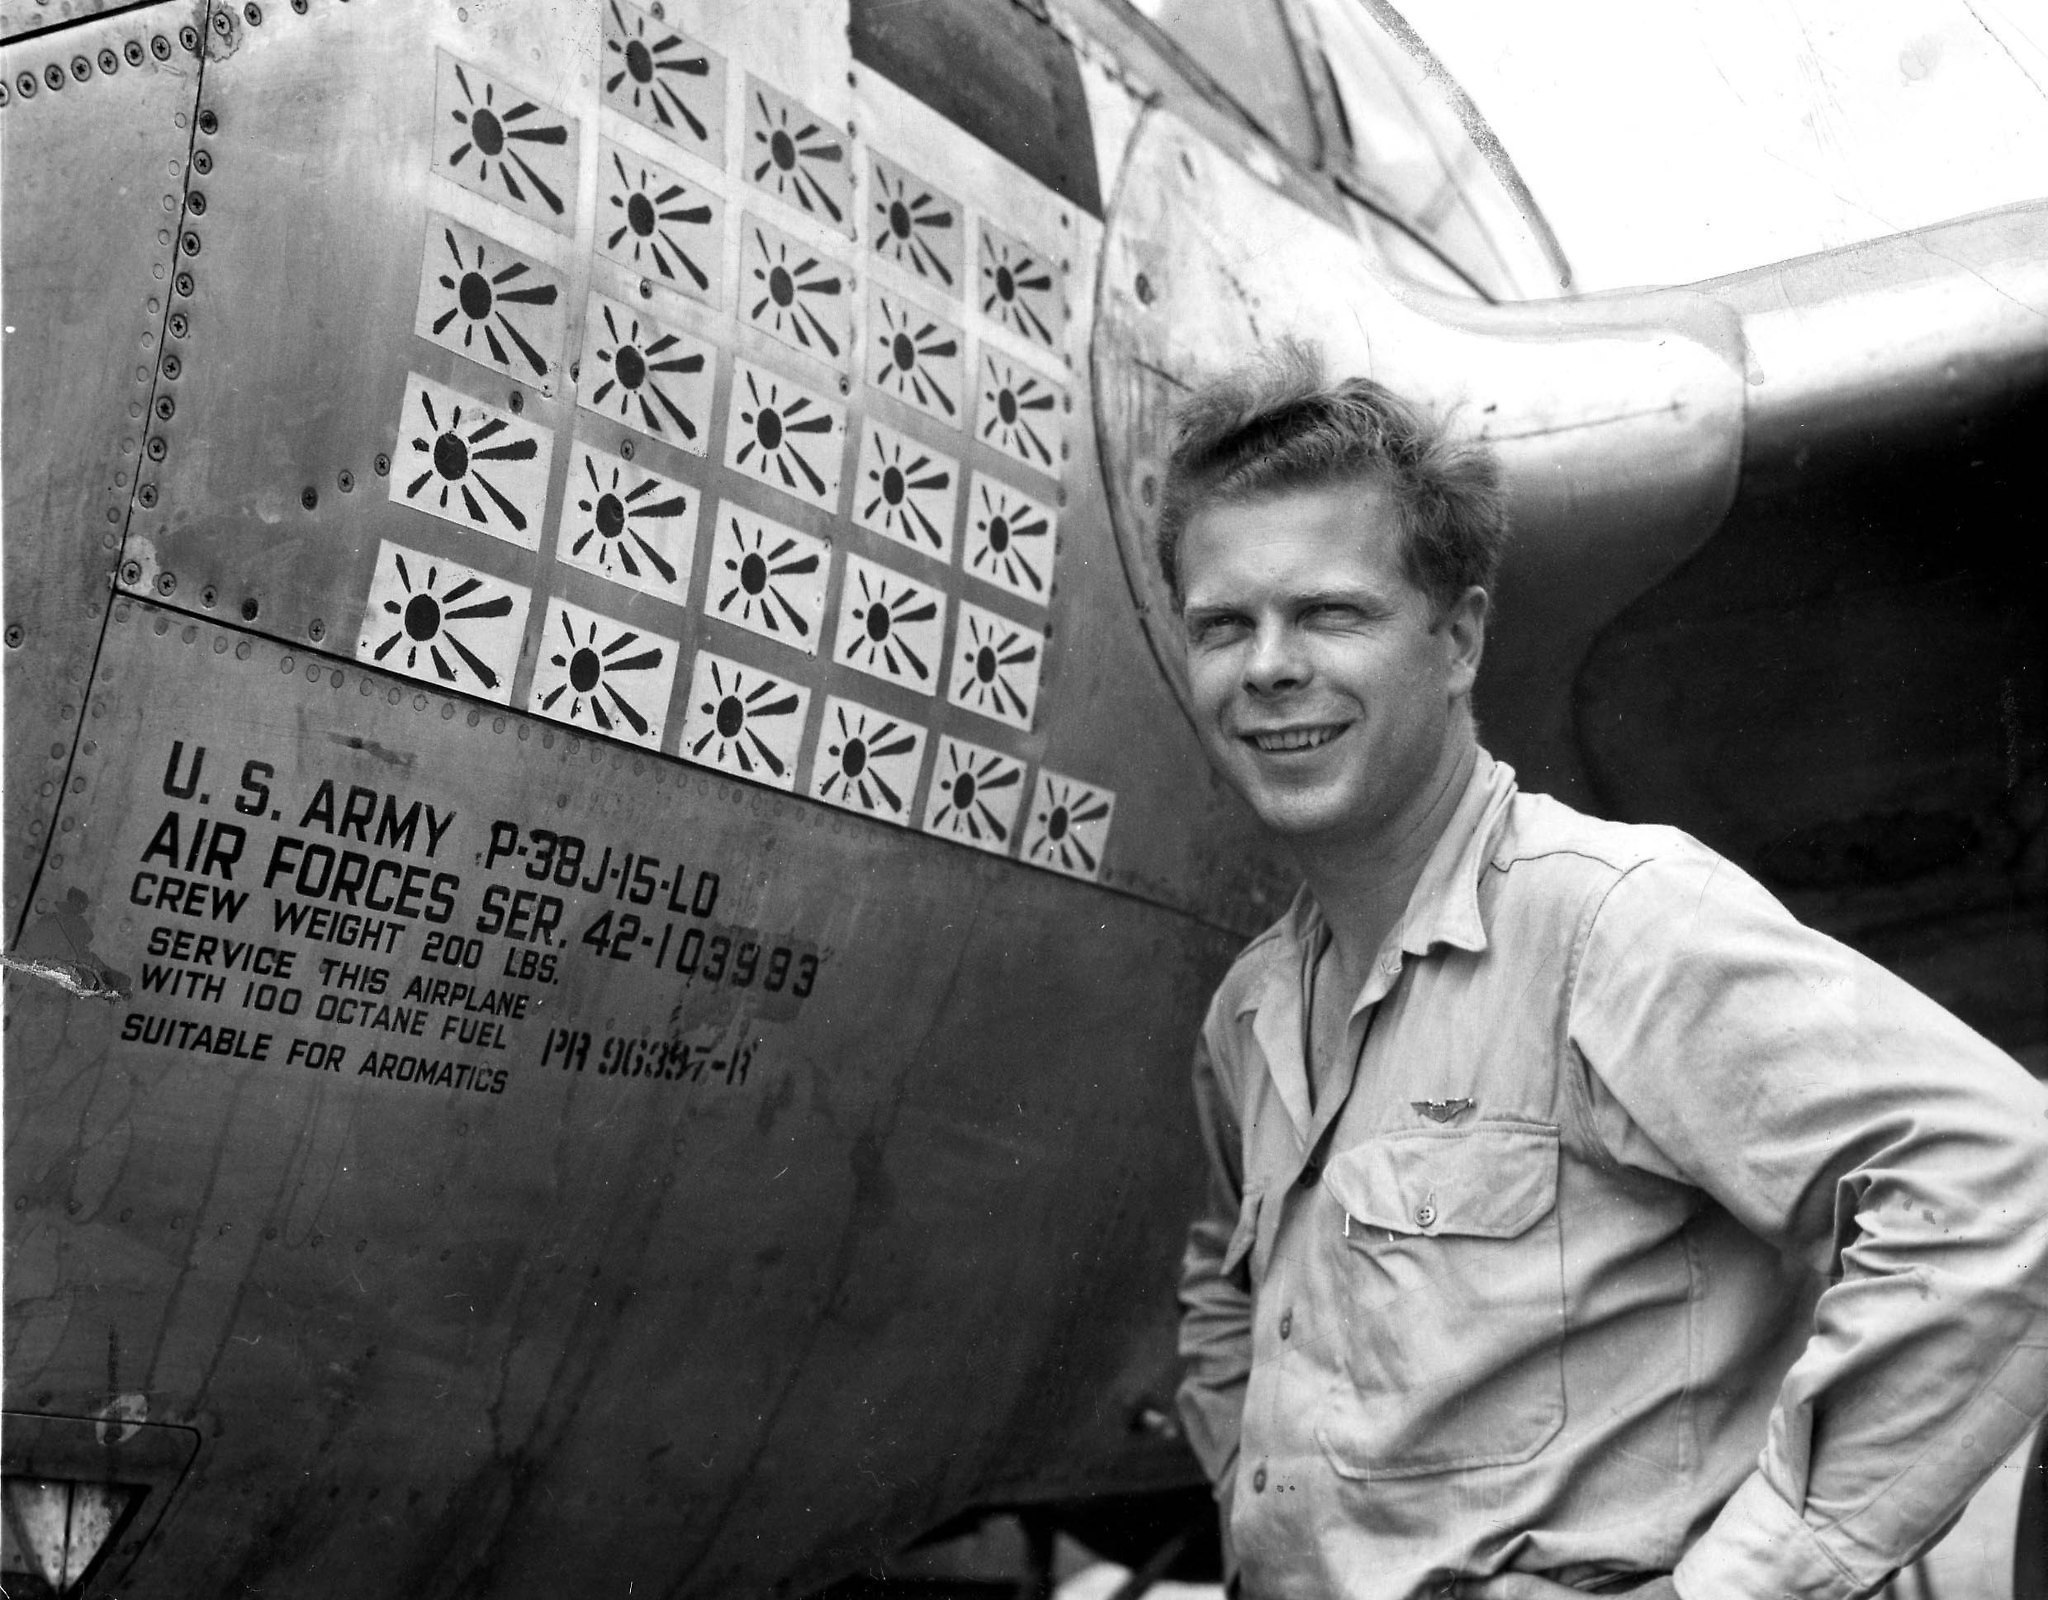 Richard Bong, the World War II fighter ace from Poplar, Wisconsin, was a captain when this photo was taken next to his P-38 fighter in the South Pacific in 1944. At the time, he had 25 Japanese flags flags on the side of his plane to show his score od downed enemy aircraft. Bong went on to down 40 enemy aircraft.